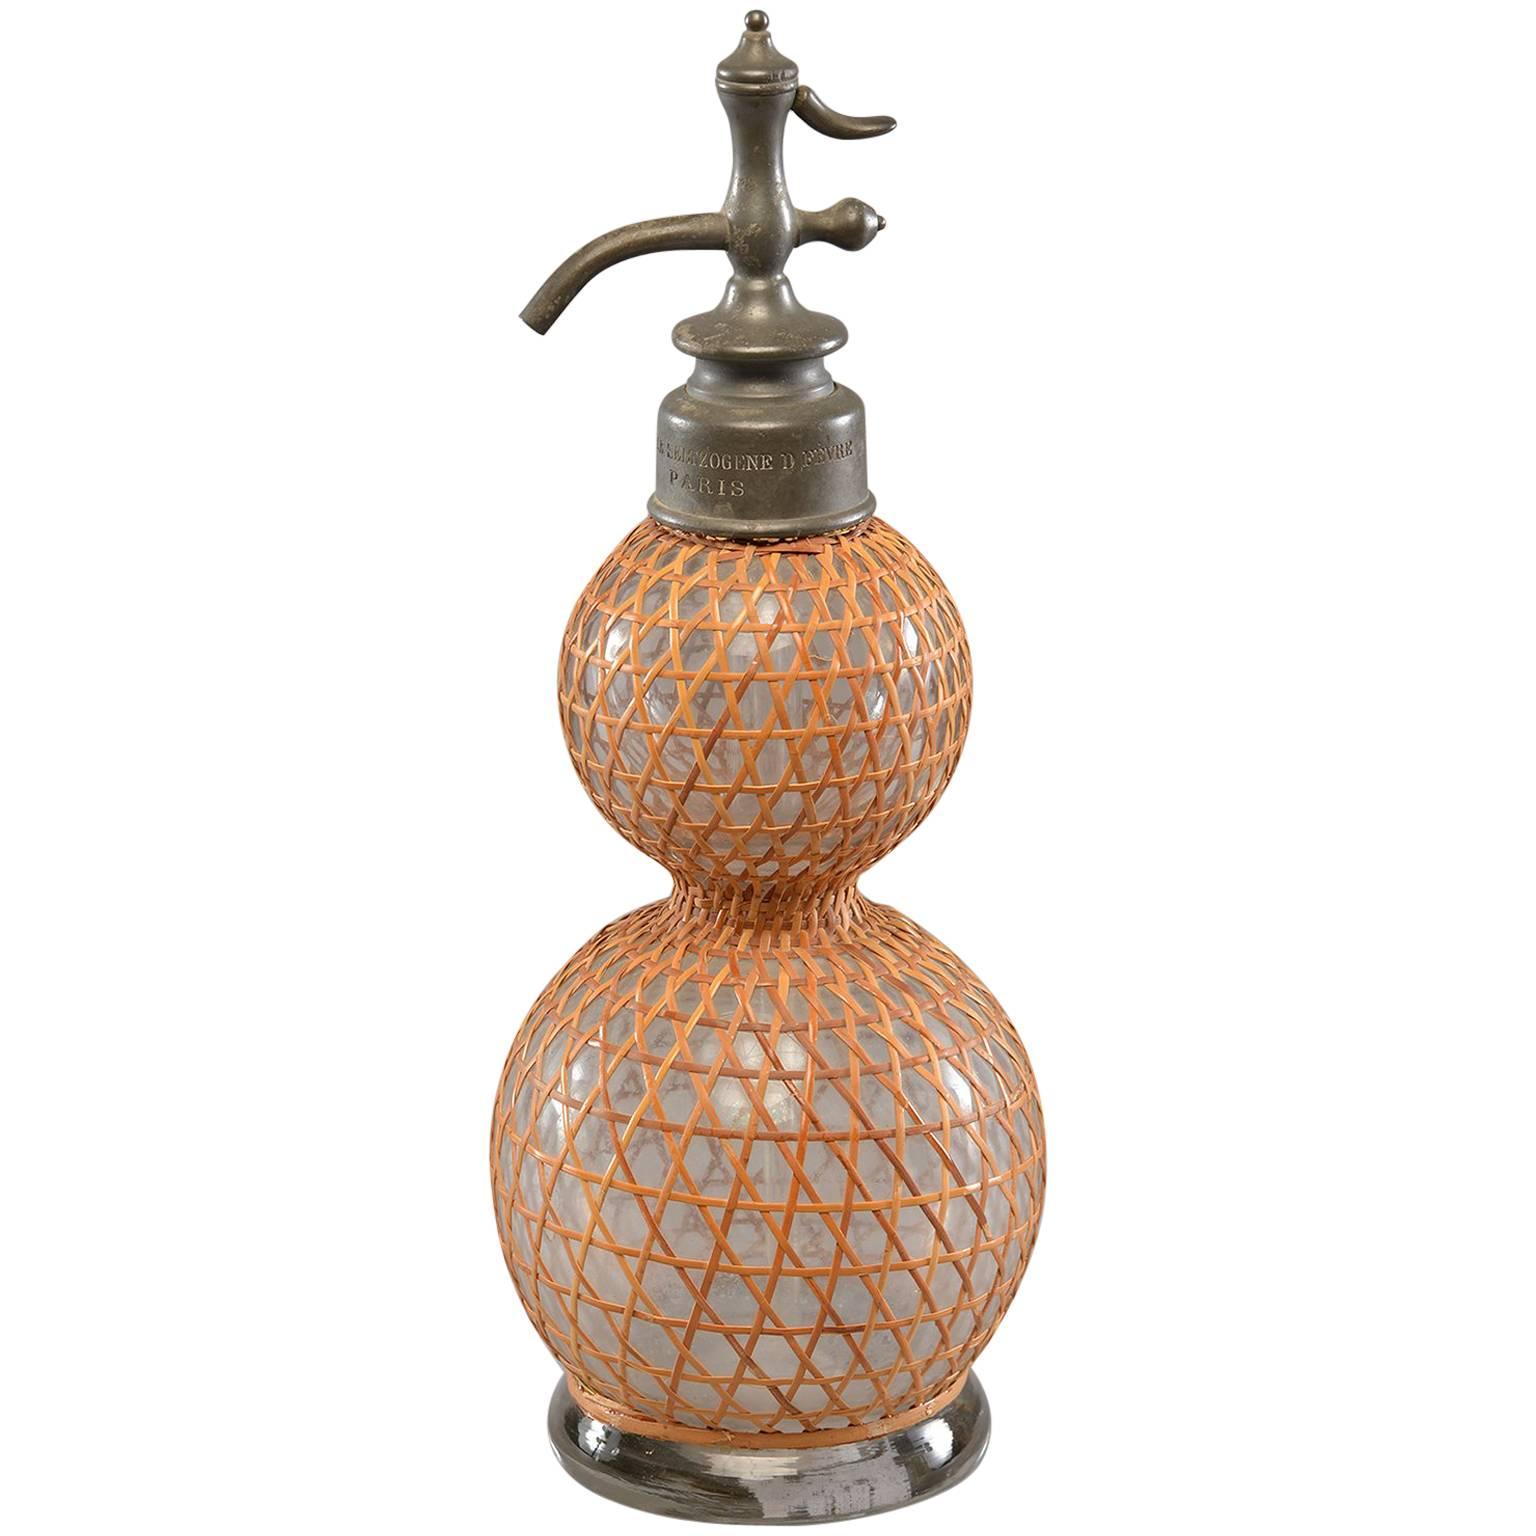 Antique French Syphon Bottle with Rattan Cover